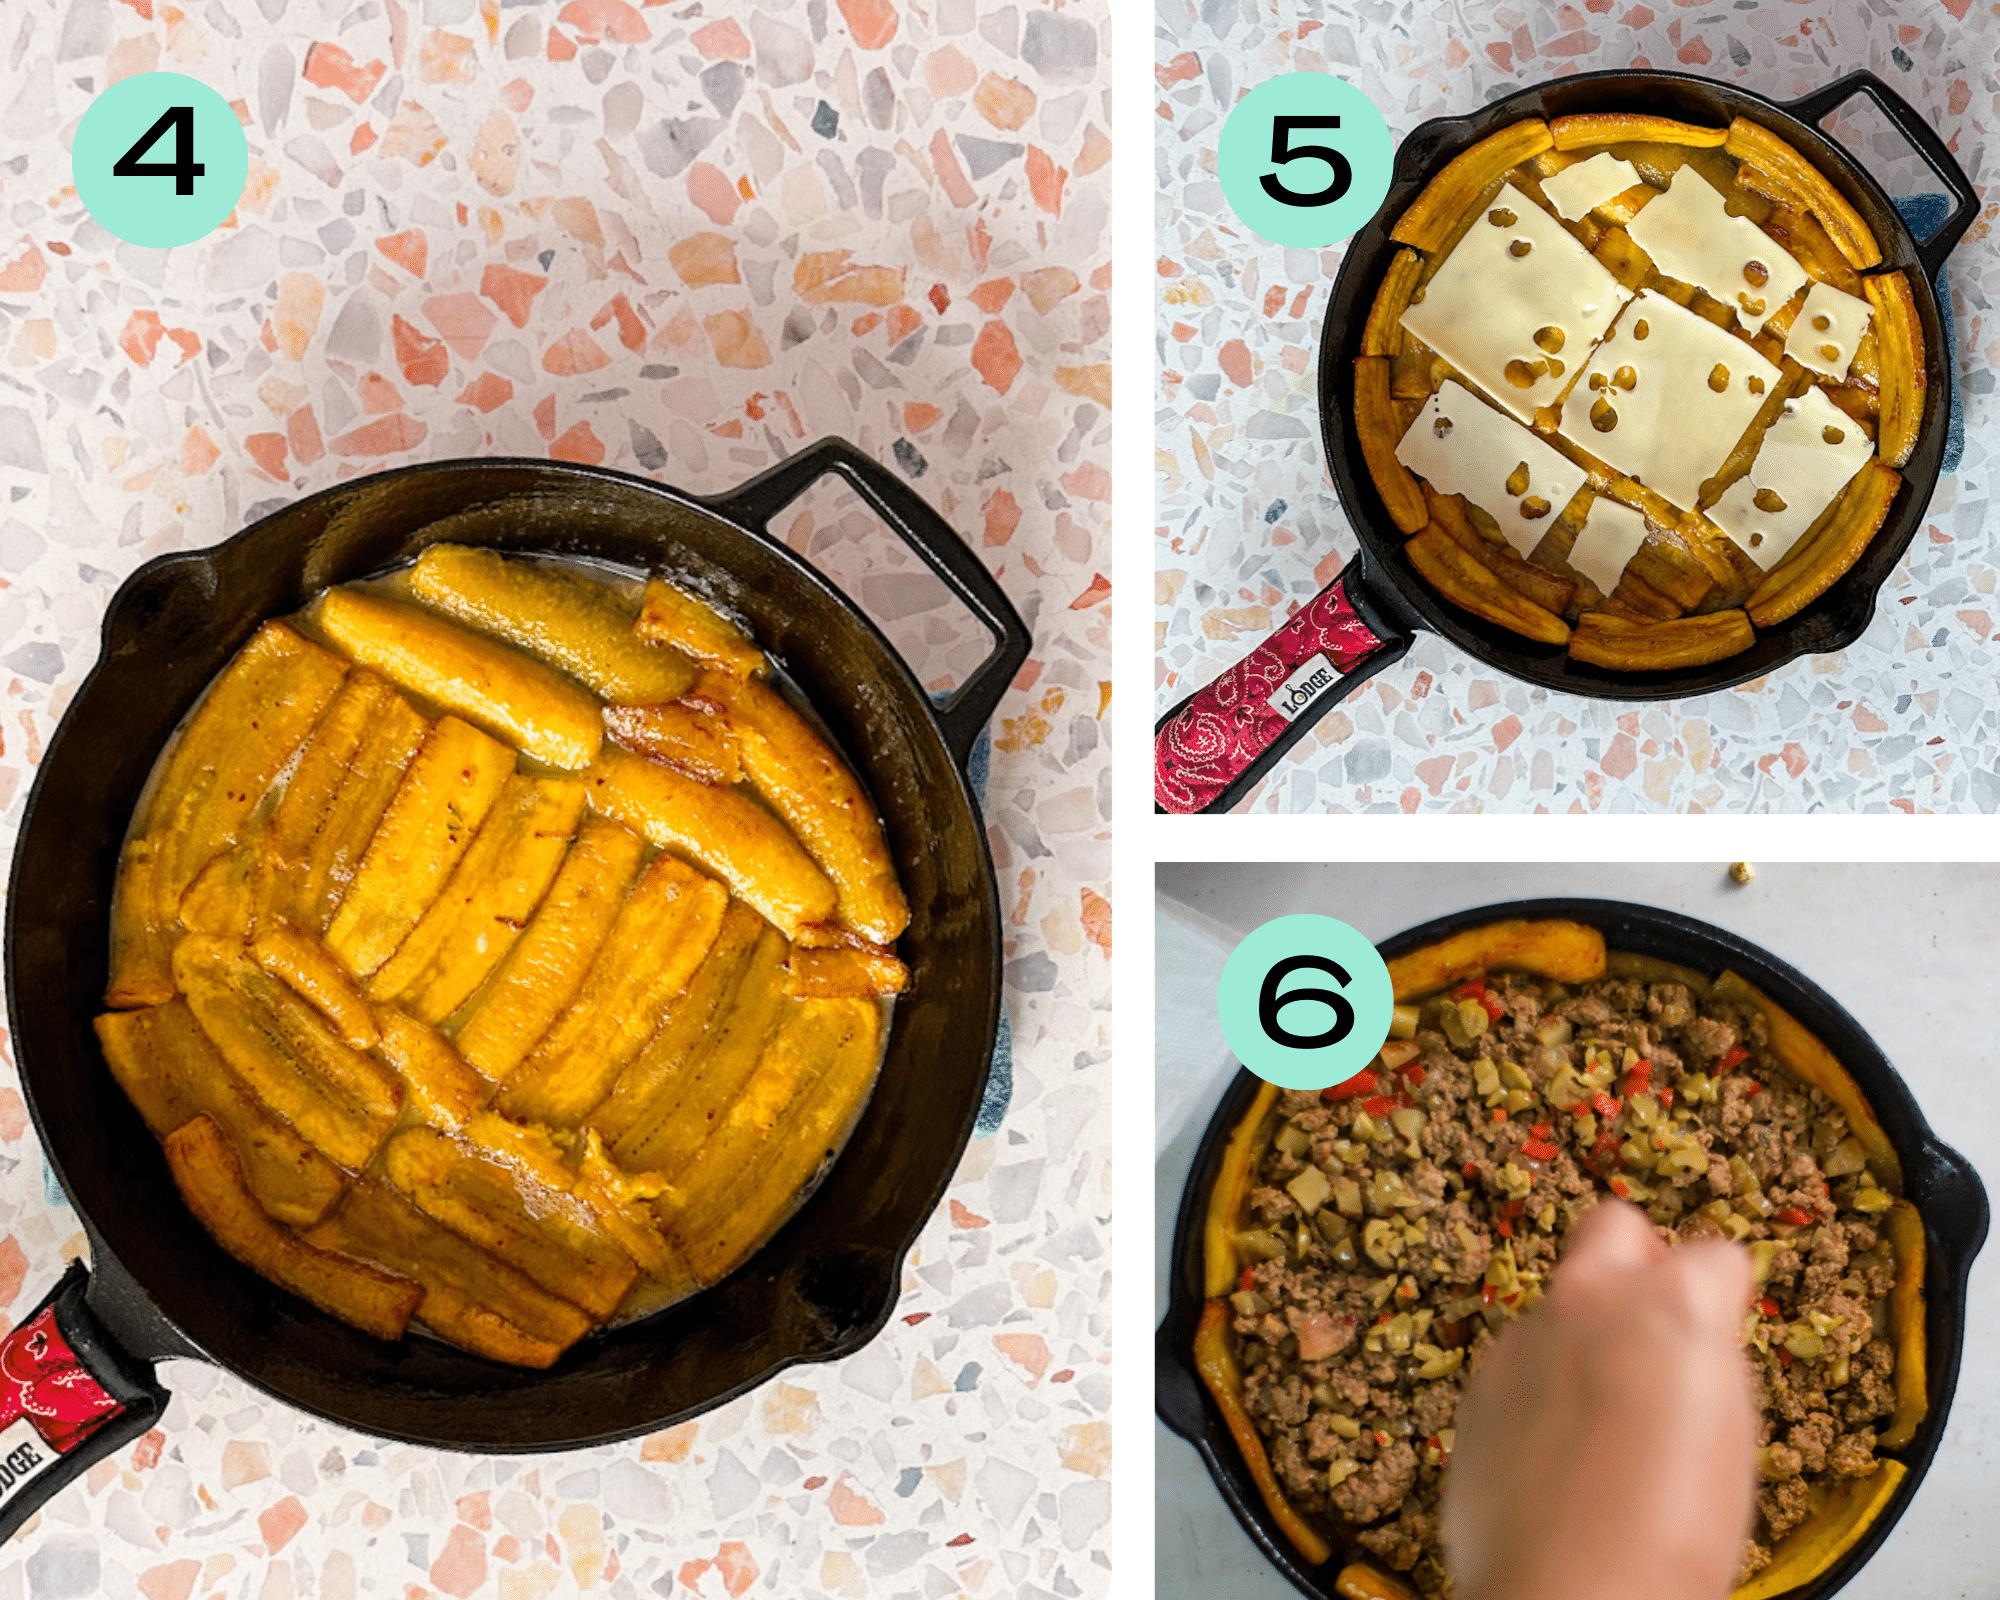 Building pastelon: 4-pour egg on bottom of pan, 5-place a layer of cheese, 6-top with meat filling.